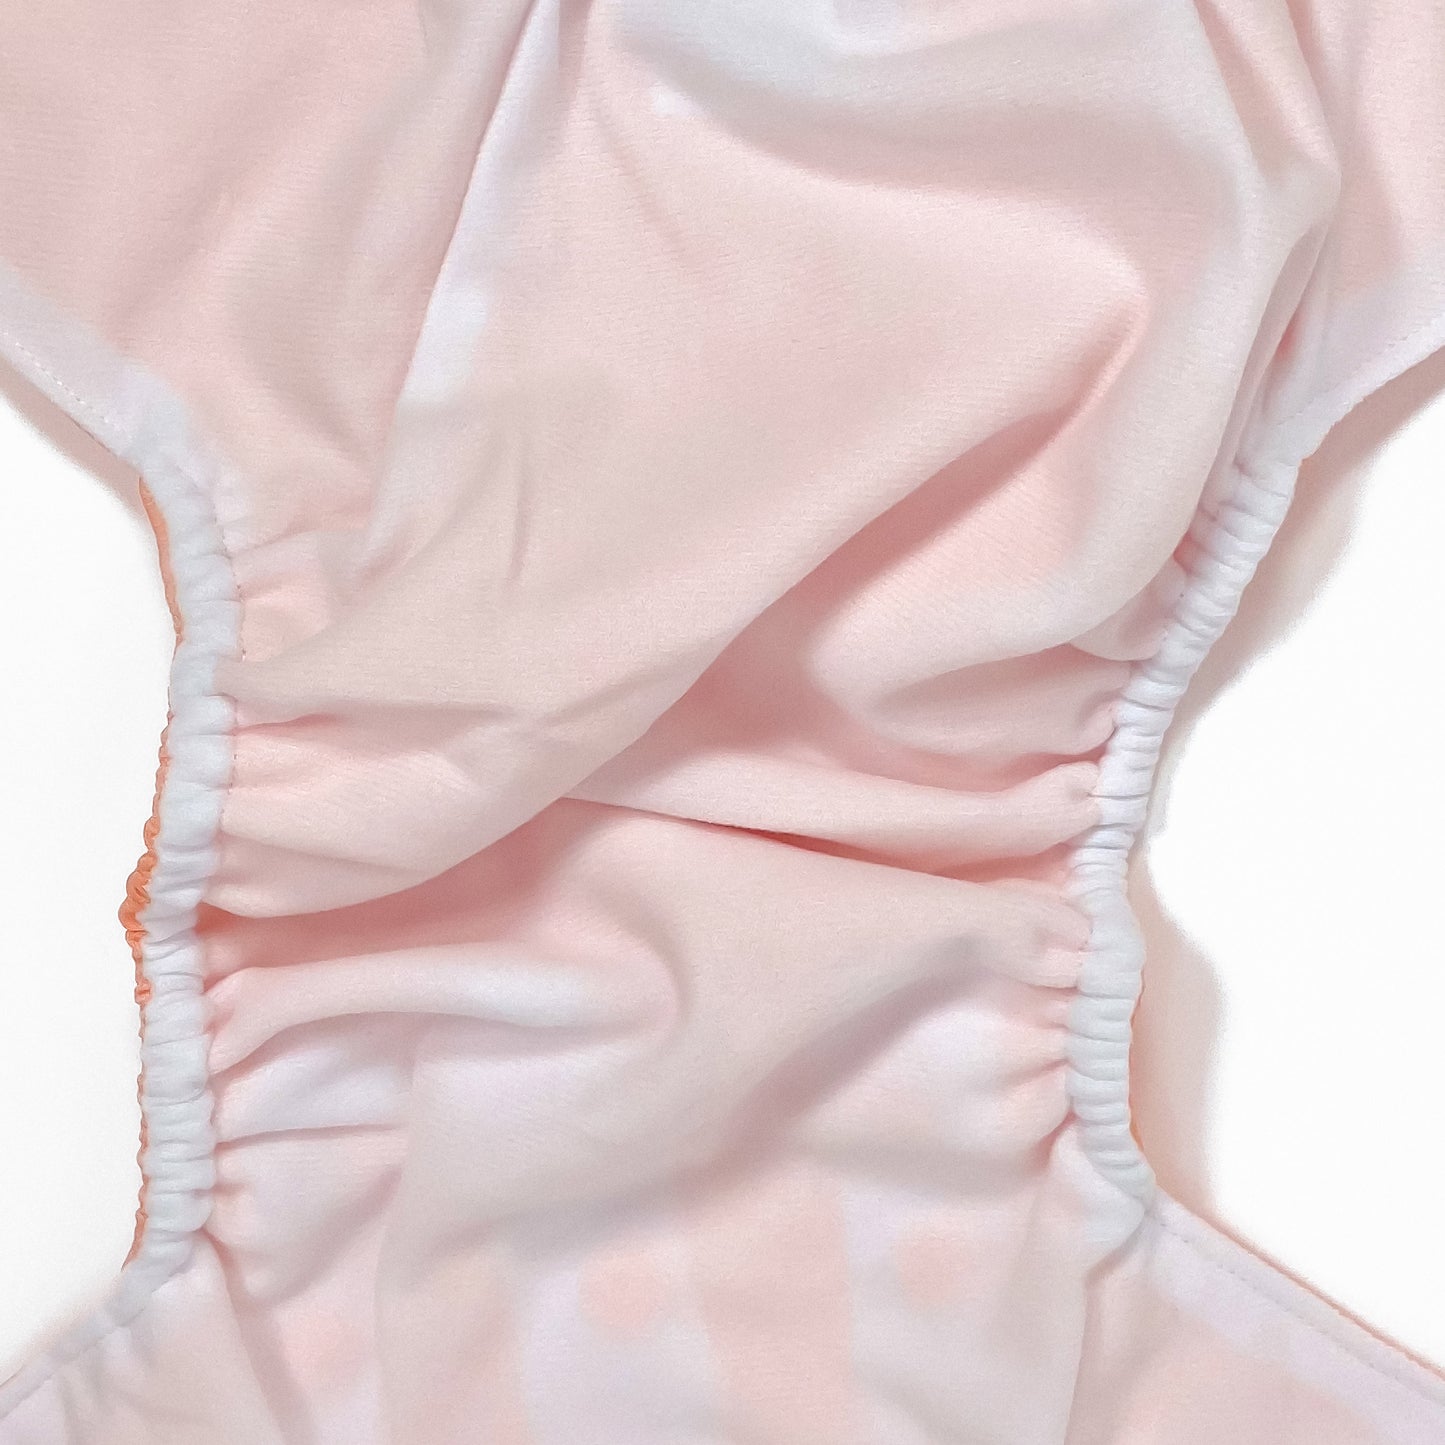 An adjustable reusable nappy for babies and toddlers, in a bright coral colour. Image shows a zoomed in view of the nappy fabric lining.